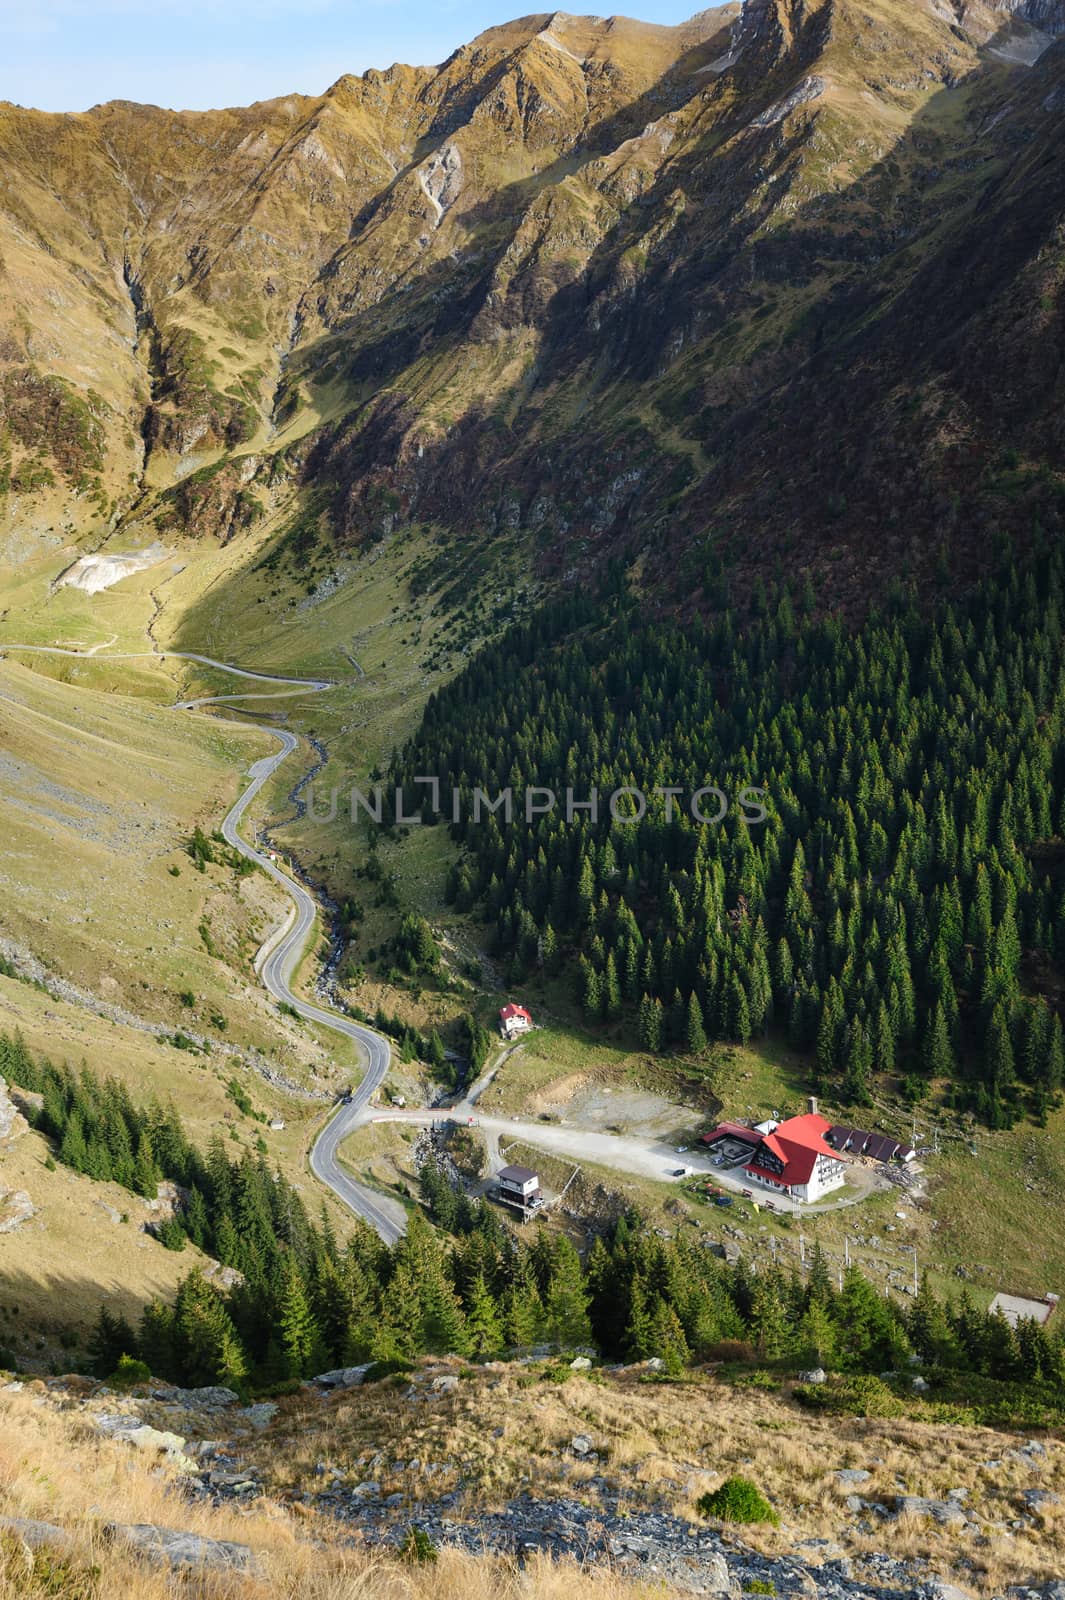 View from Transfagarasan road down to valley. It is a paved mountain road crossing the southern section of the Carpathian Mountains of Romania.